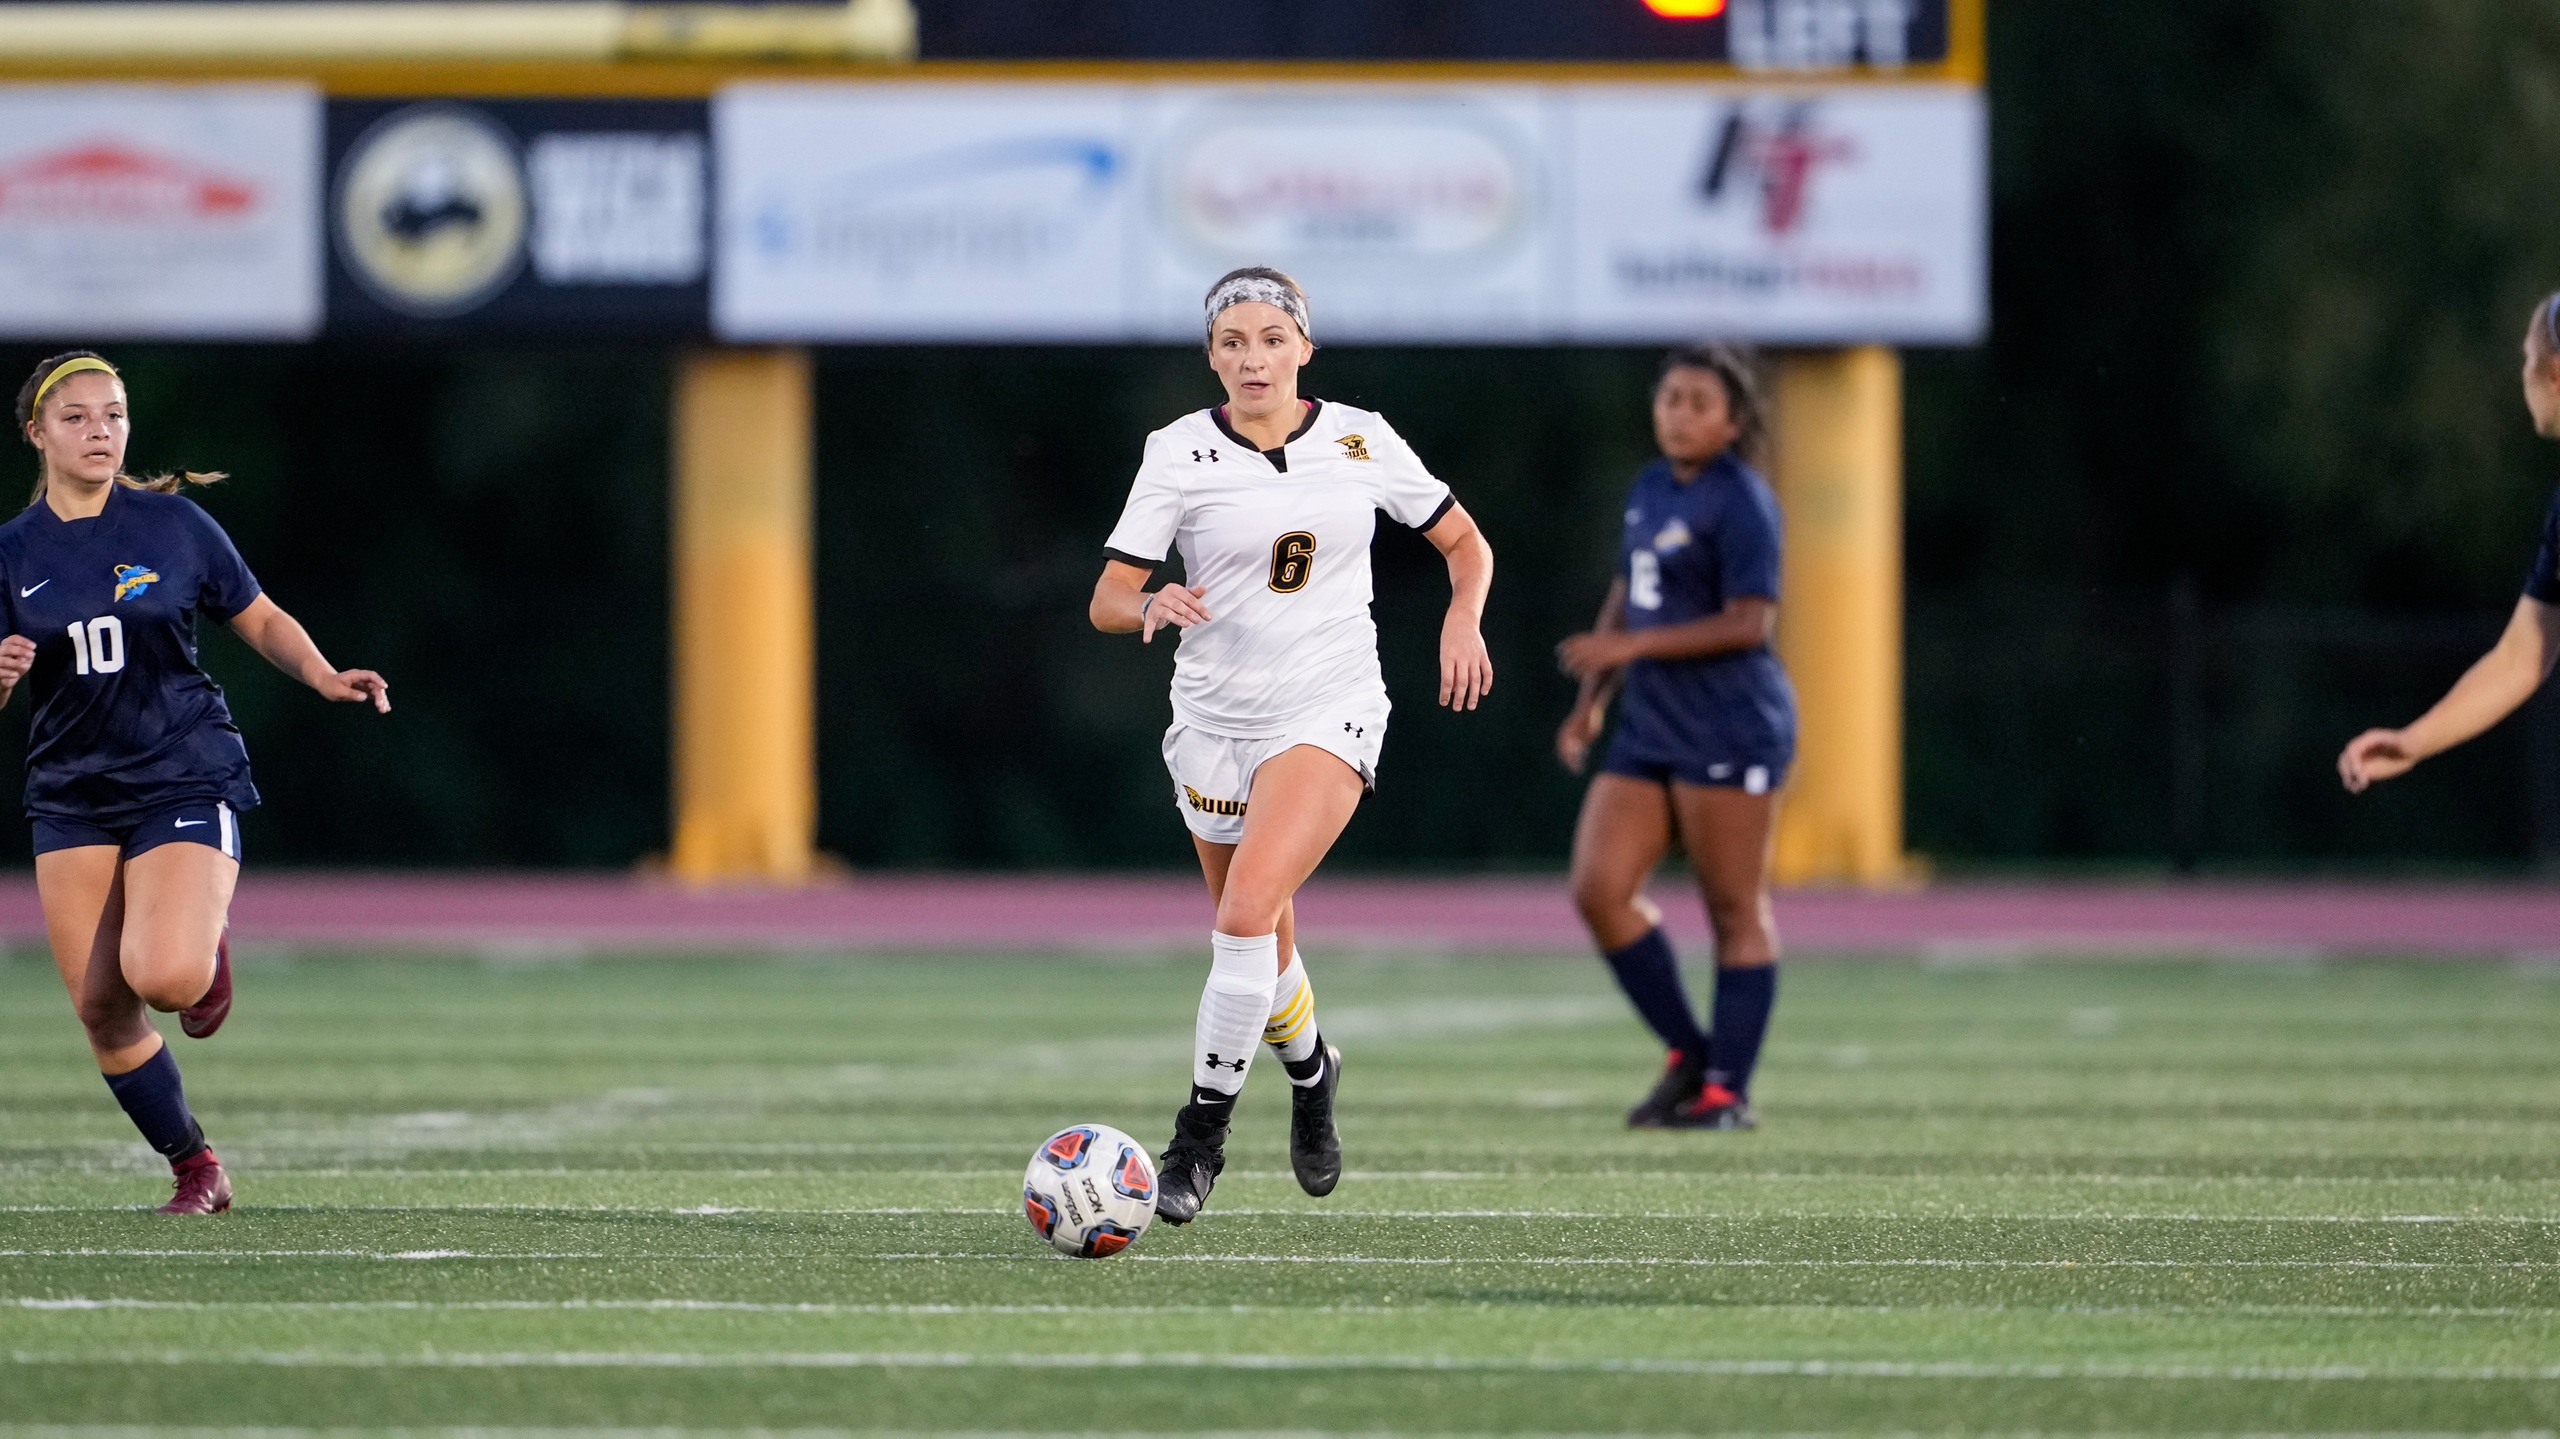 Mallory Knight's goal in the sixth minute of play gave the Titans a 1-0 lead over the Muskies.